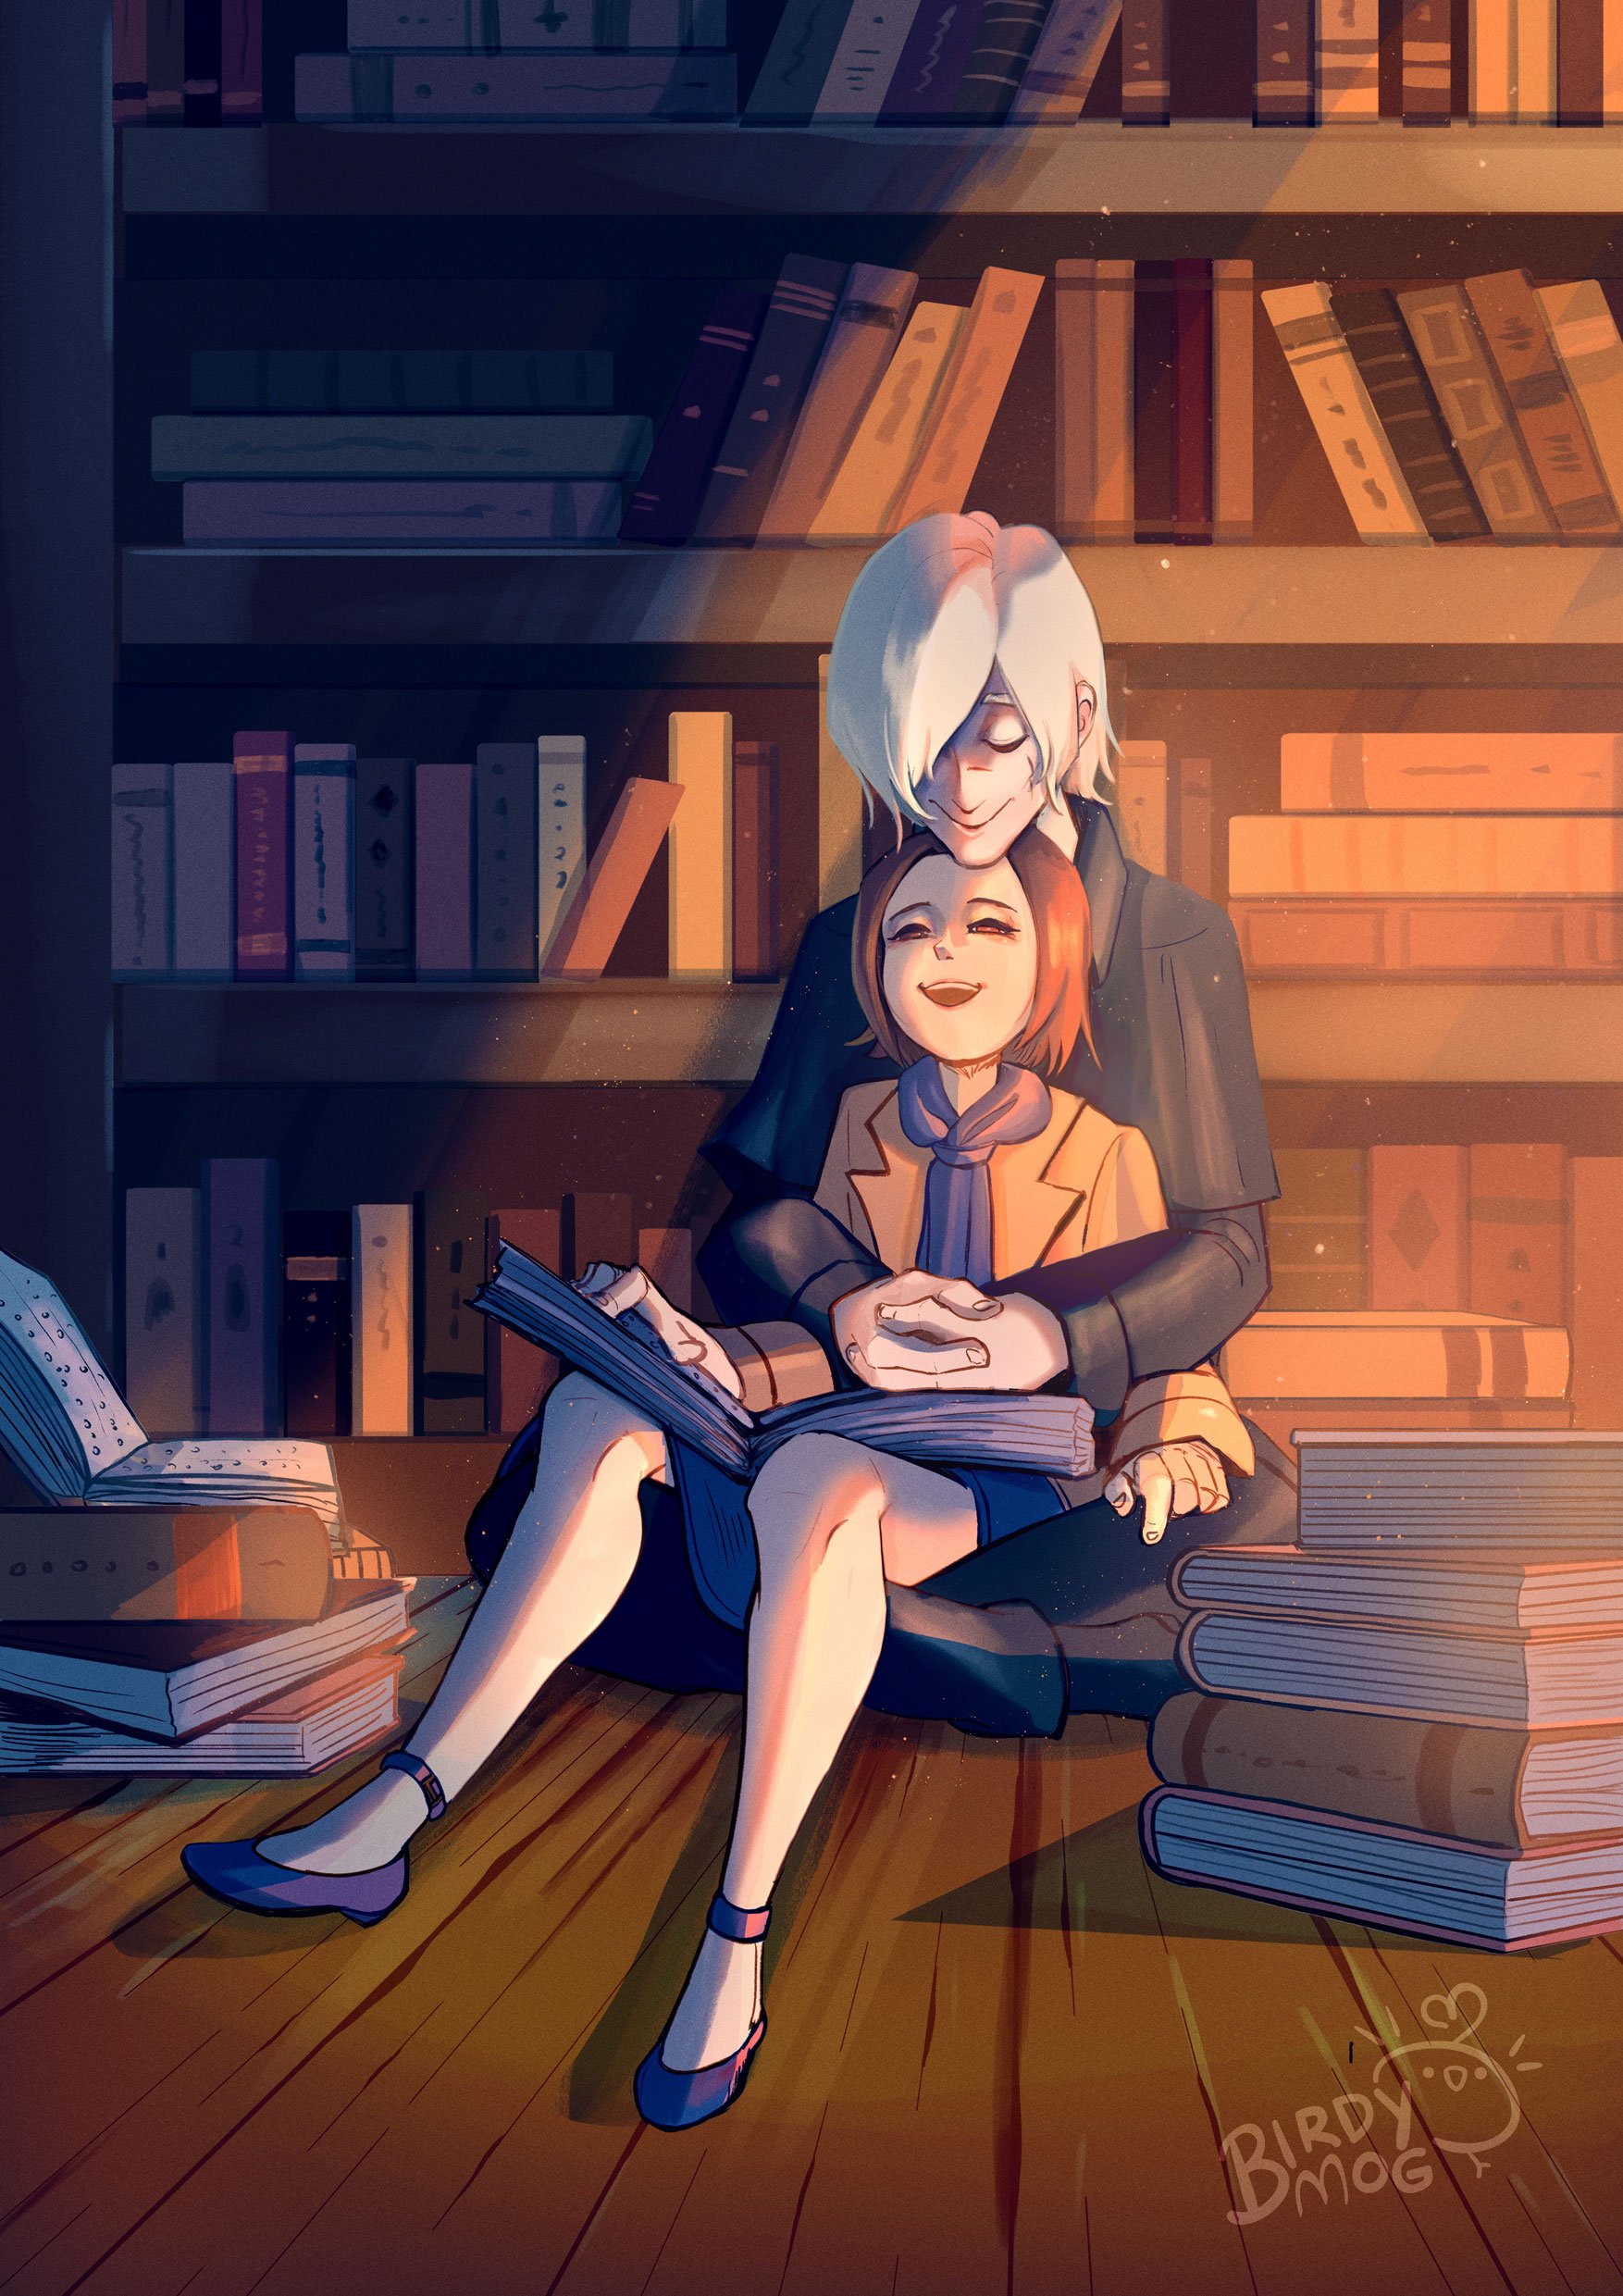 They're Reading Books